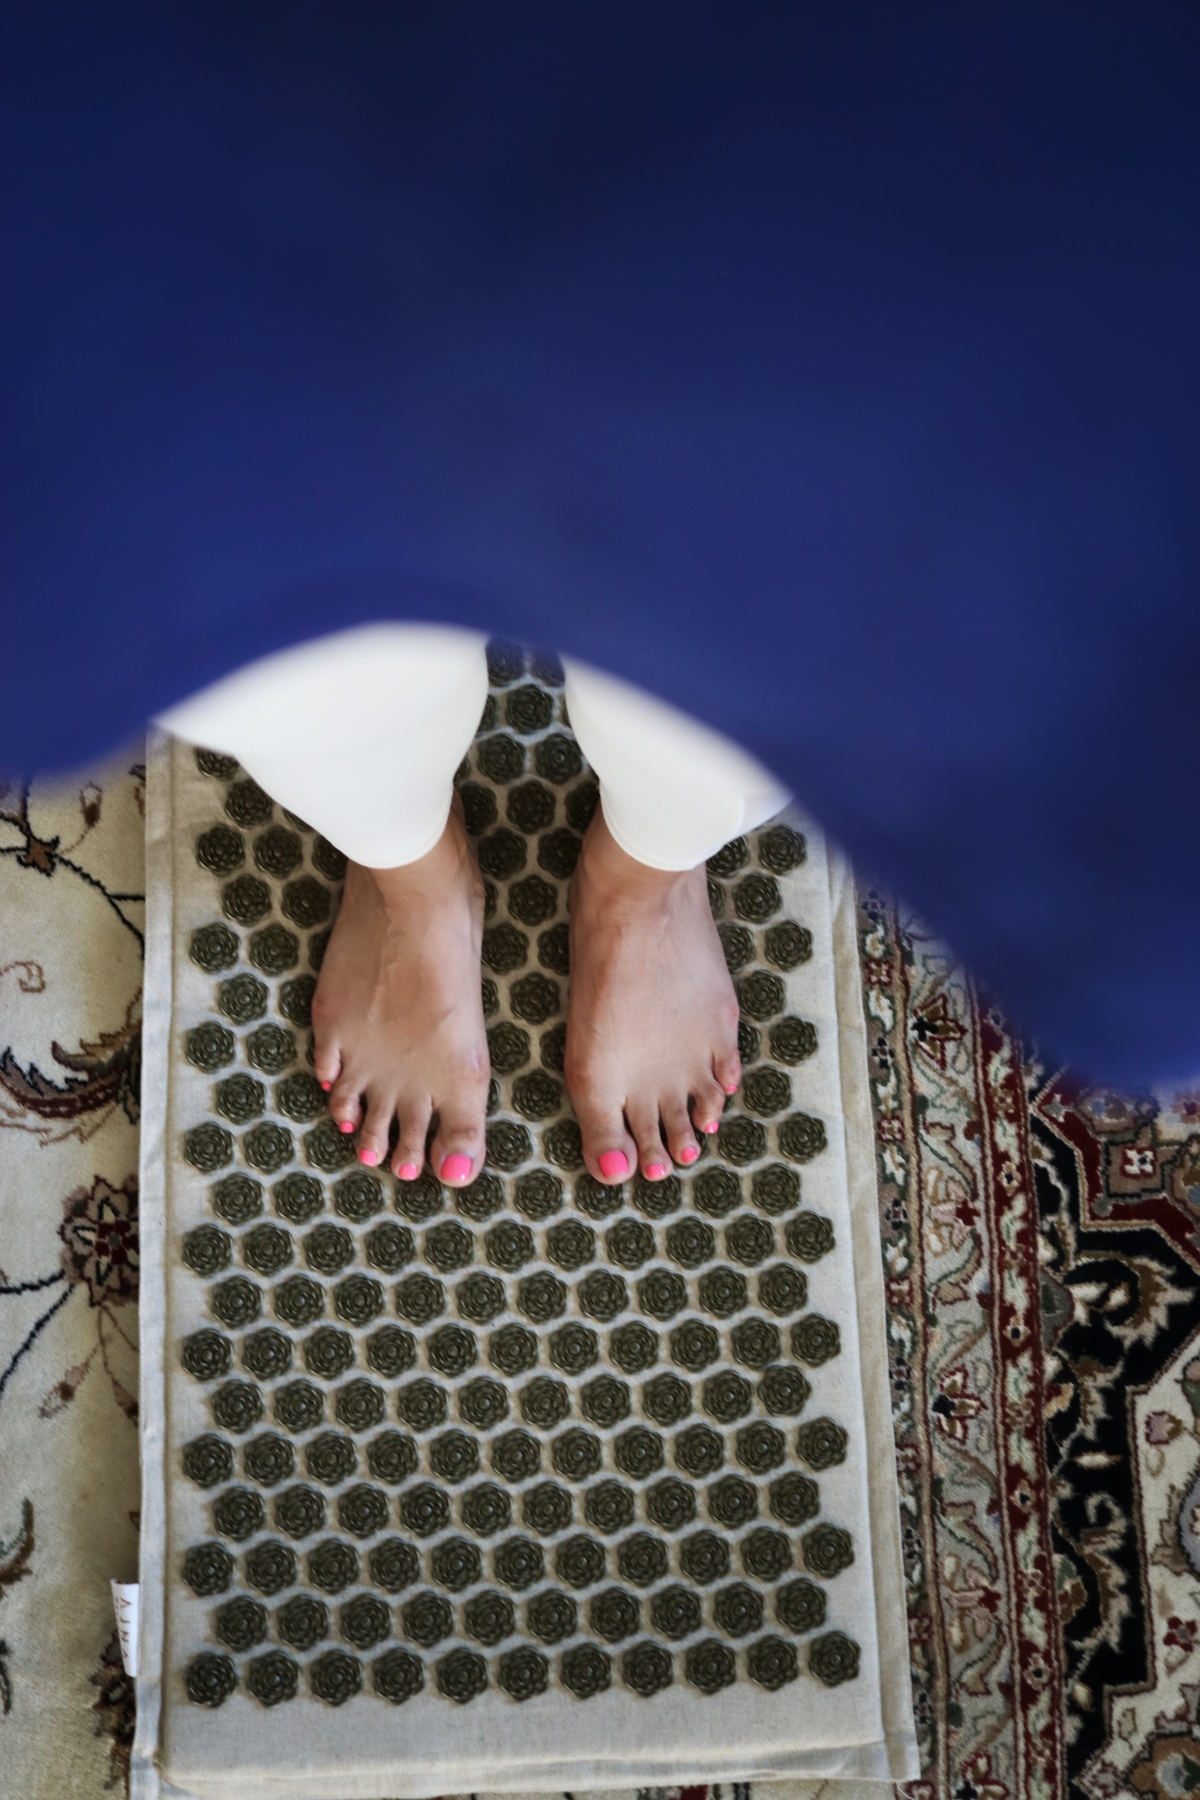 A natural approach to healing: Acupressure mats and pillows